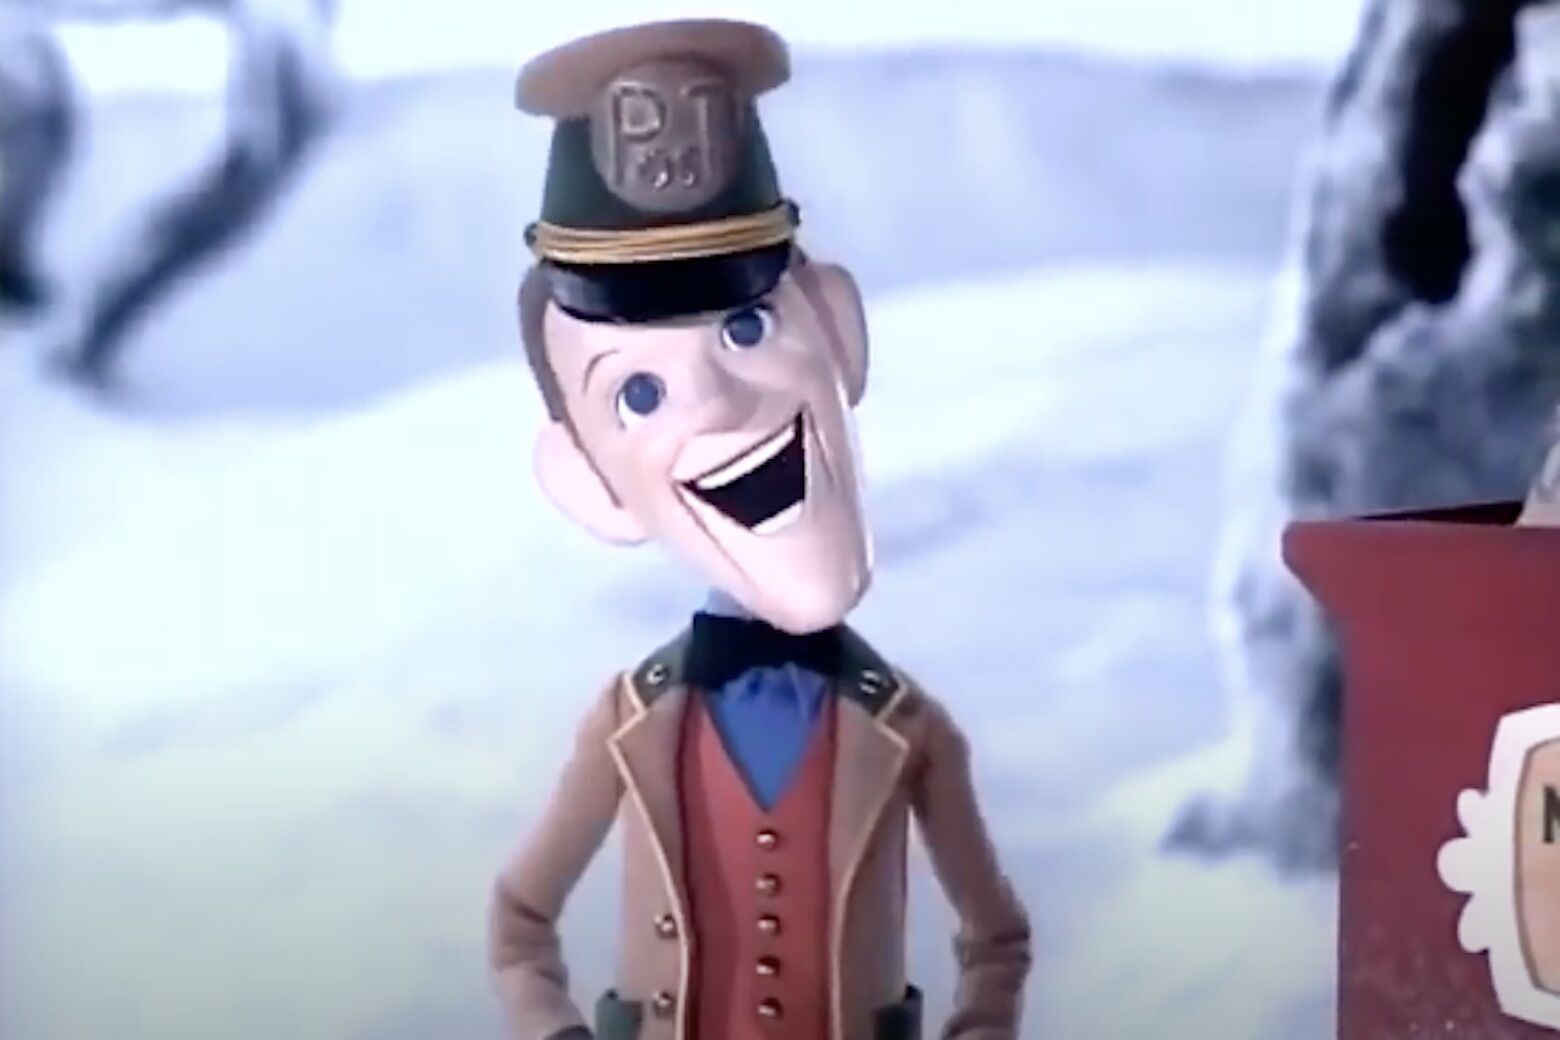 The Definitive List of Rankin Bass Christmas Claymation Movies